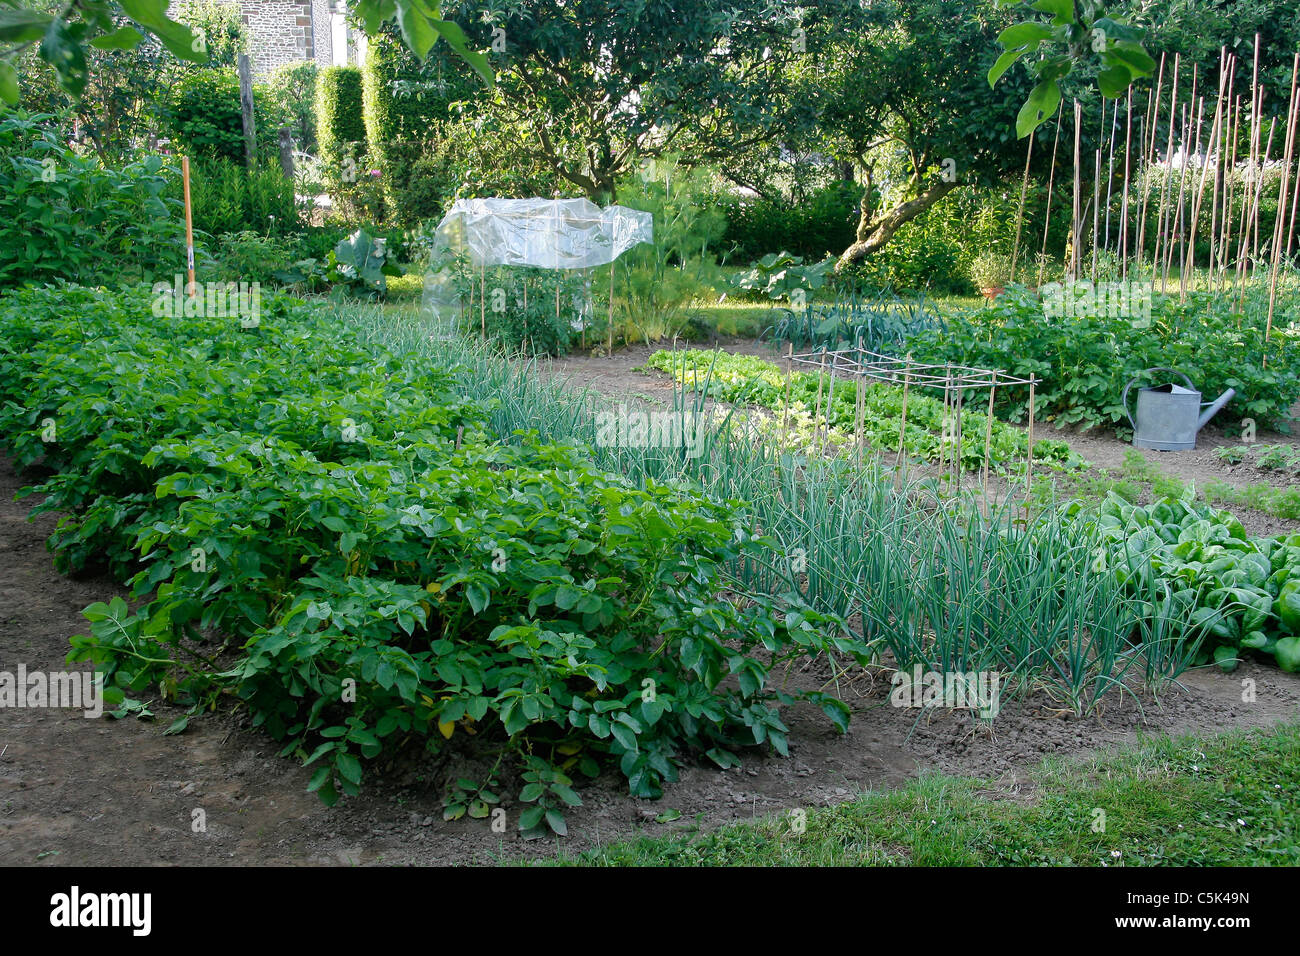 A vegetable garden, vegetables plots : potatoes, shallots, spinach, lettuce, potatoes, tomatoes... Stock Photo